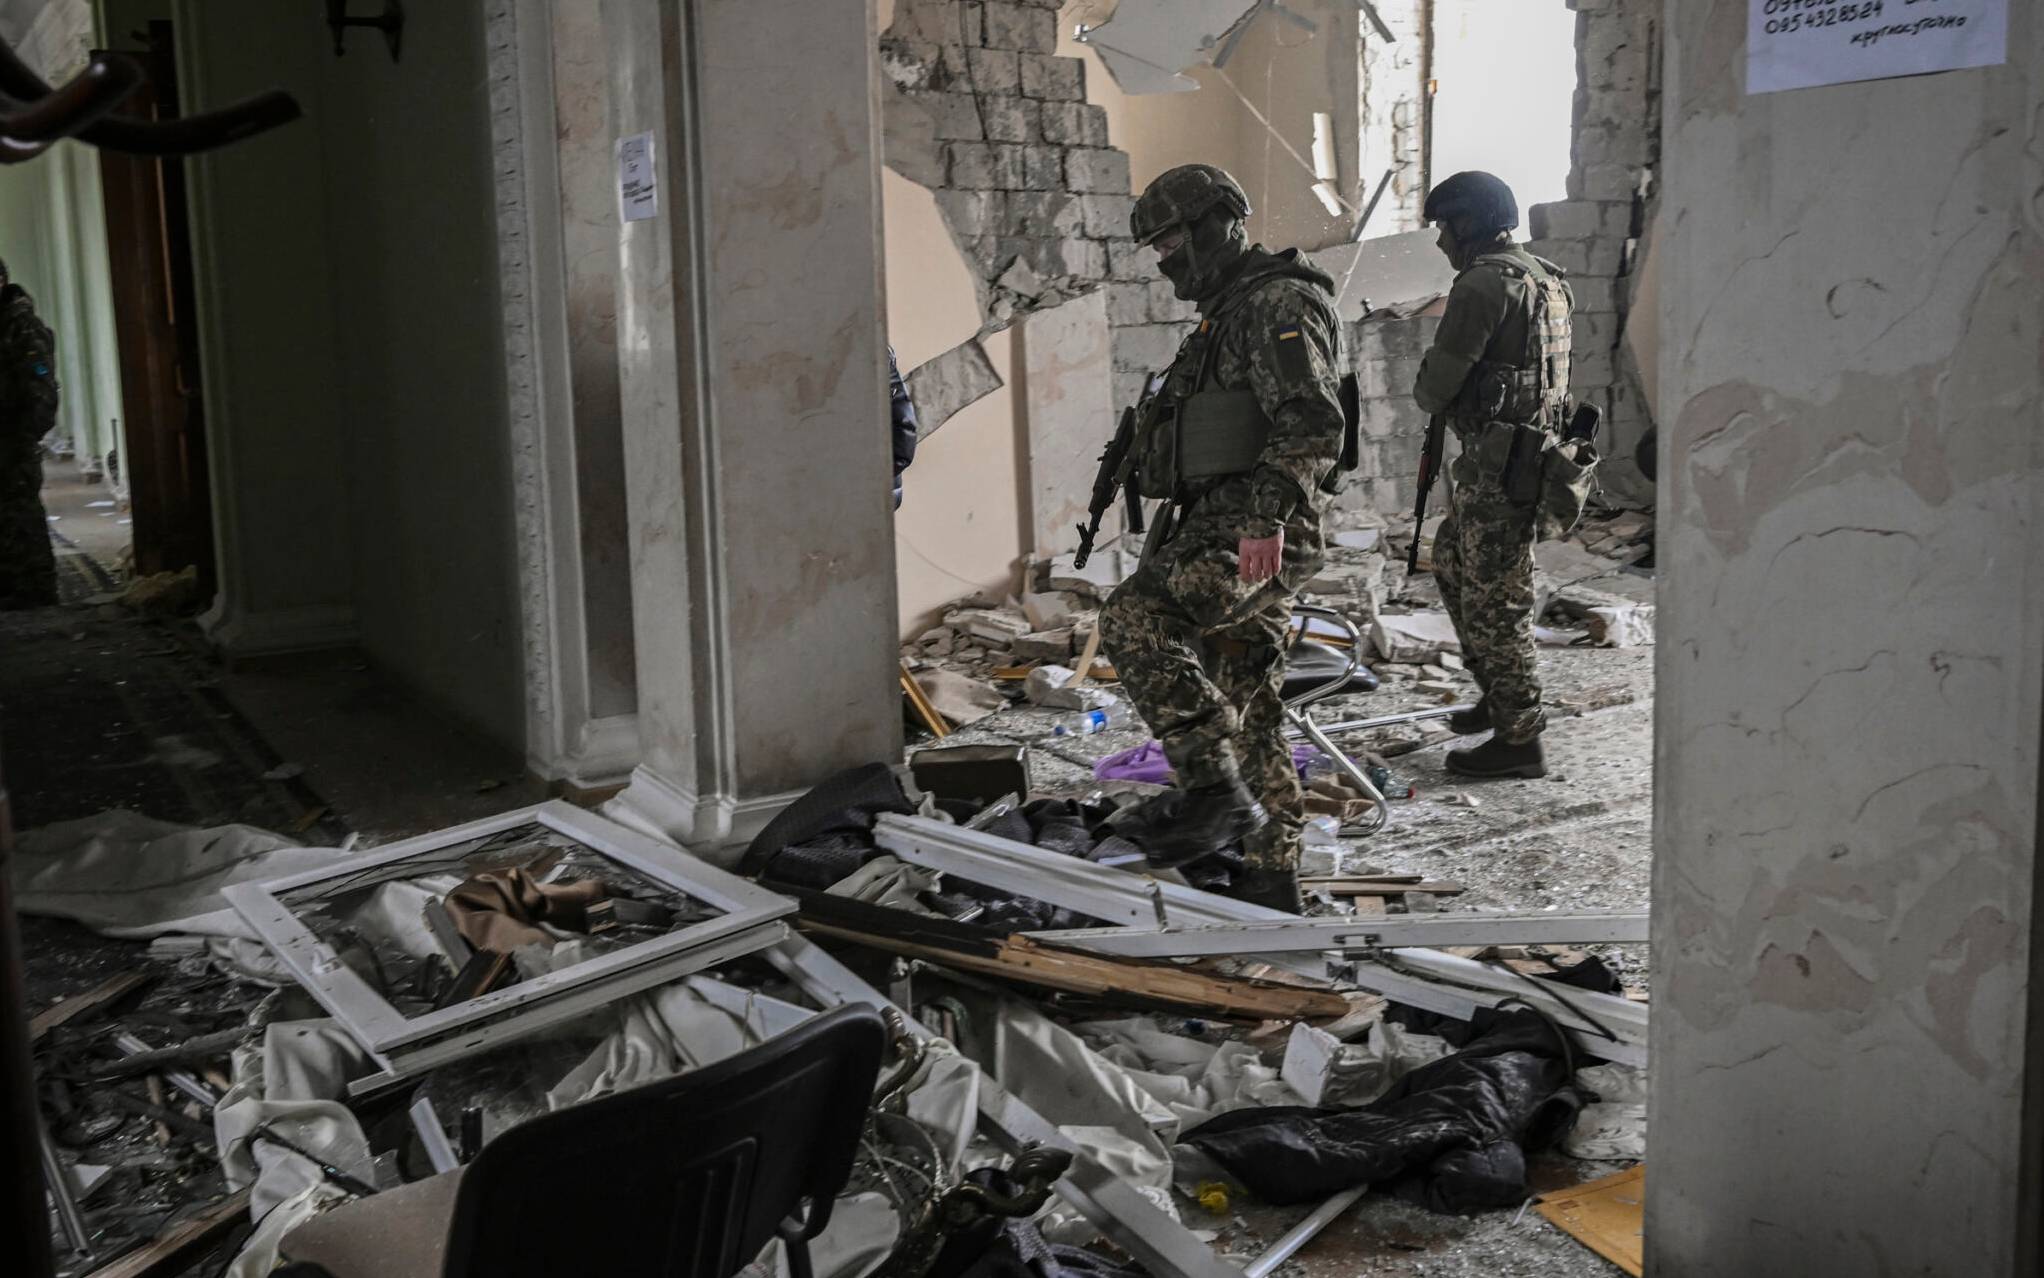 Ukranian servicemen walk inside the destroyed regional headquarters of Kharkiv on March 27, 2022. - France's President Emmanuel Macron has warned against a verbal "escalation" of Russia's invasion in Ukraine, after US President Joe Biden branded Vladimir Putin a "butcher" who "cannot remain in power".In Kharkiv, where authorities reported 44 artillery strikes and 140 rocket assaults in a single day, residents were resigned to the incessant bombardments. (Photo by Aris Messinis / AFP)